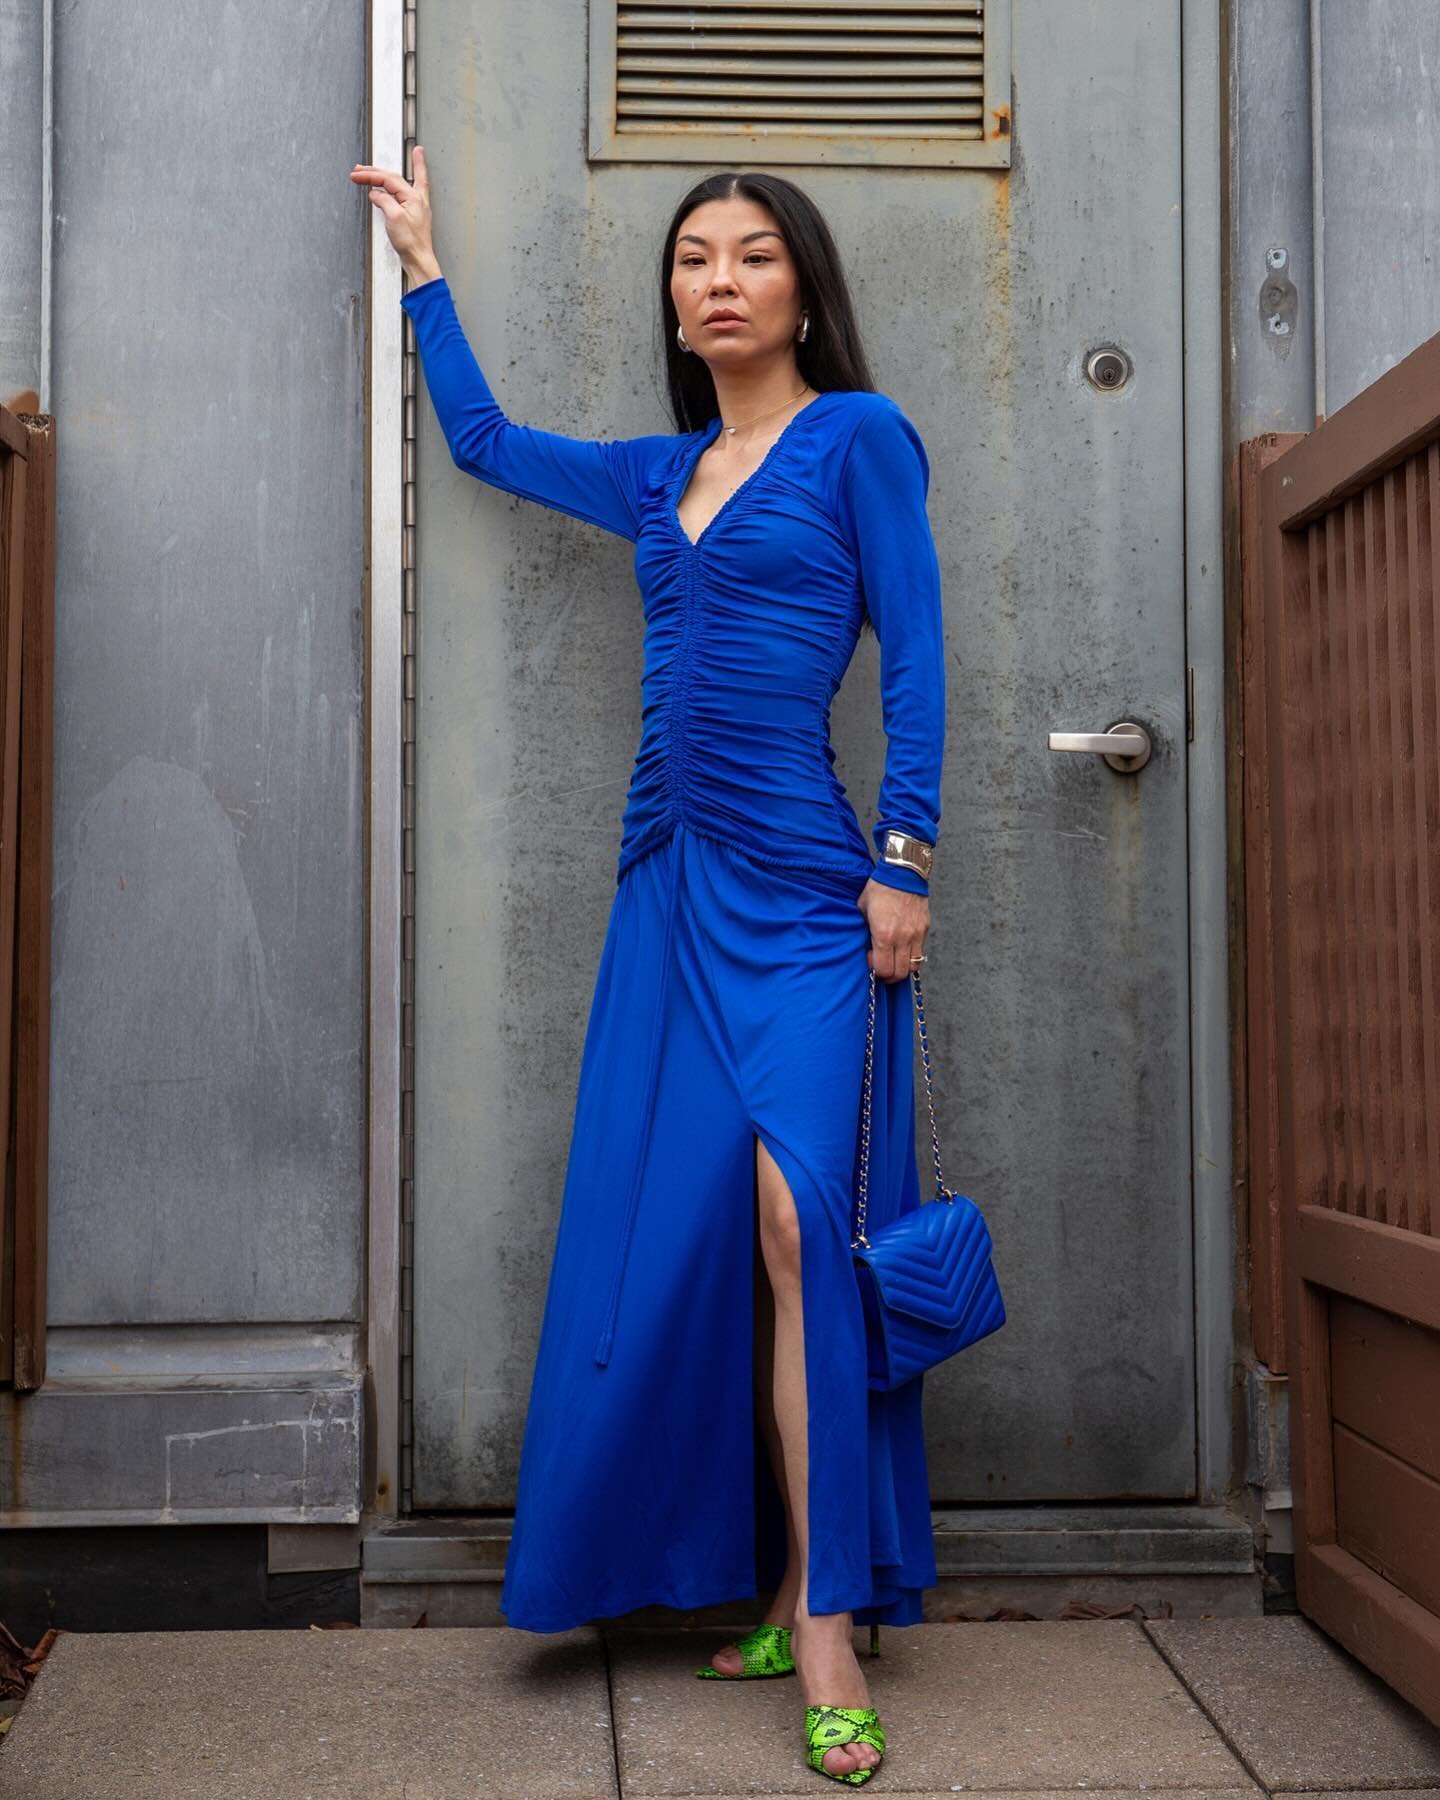 Wedding guest dresses 👗💍💐🩷
Wedding season has begun and I&rsquo;ve listed five wedding guest appropriate dresses that we girls would want to wear, and broke them up into their appropriate dress code categories: casual, cocktail, semi-formal, form